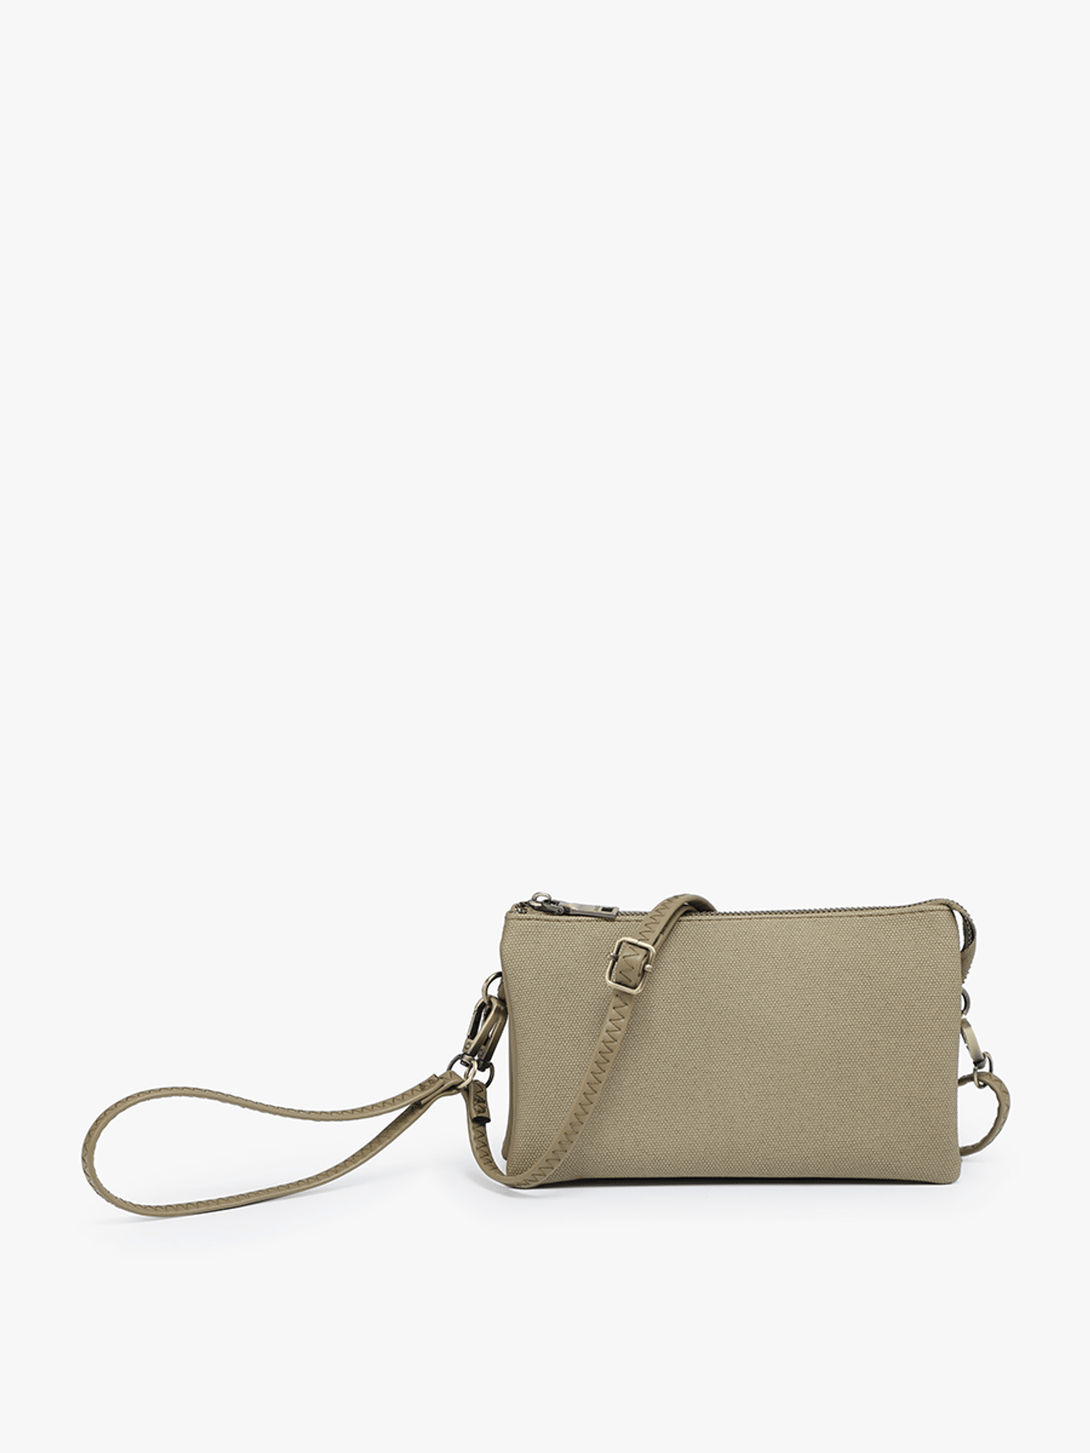 Jen & Co Riley Patterned Compartment Crossbody with Wristlet